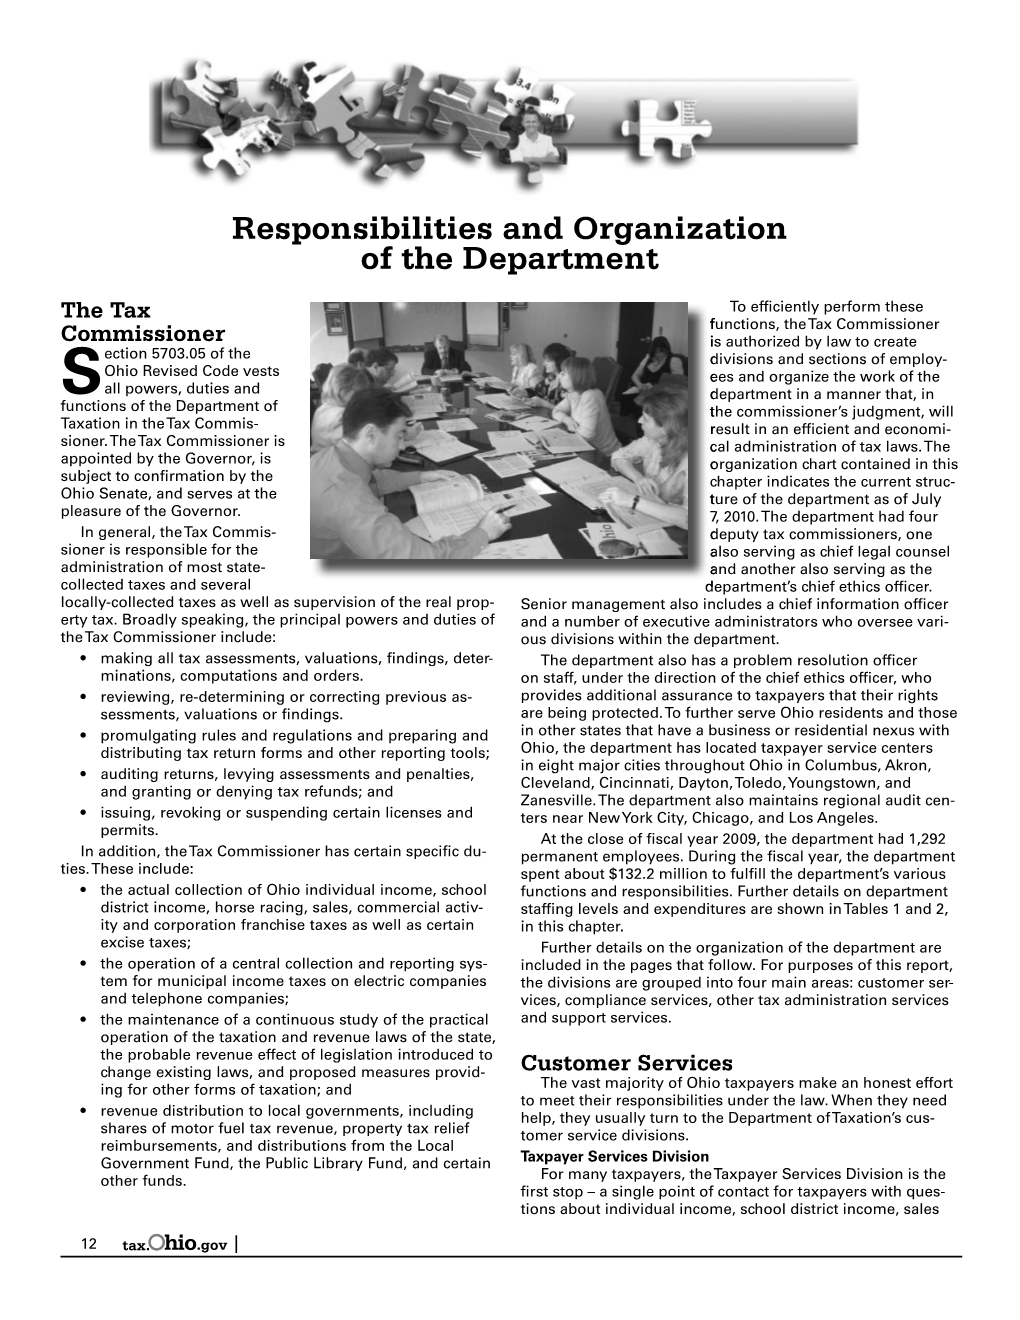 Responsibilities and Organization of the Department